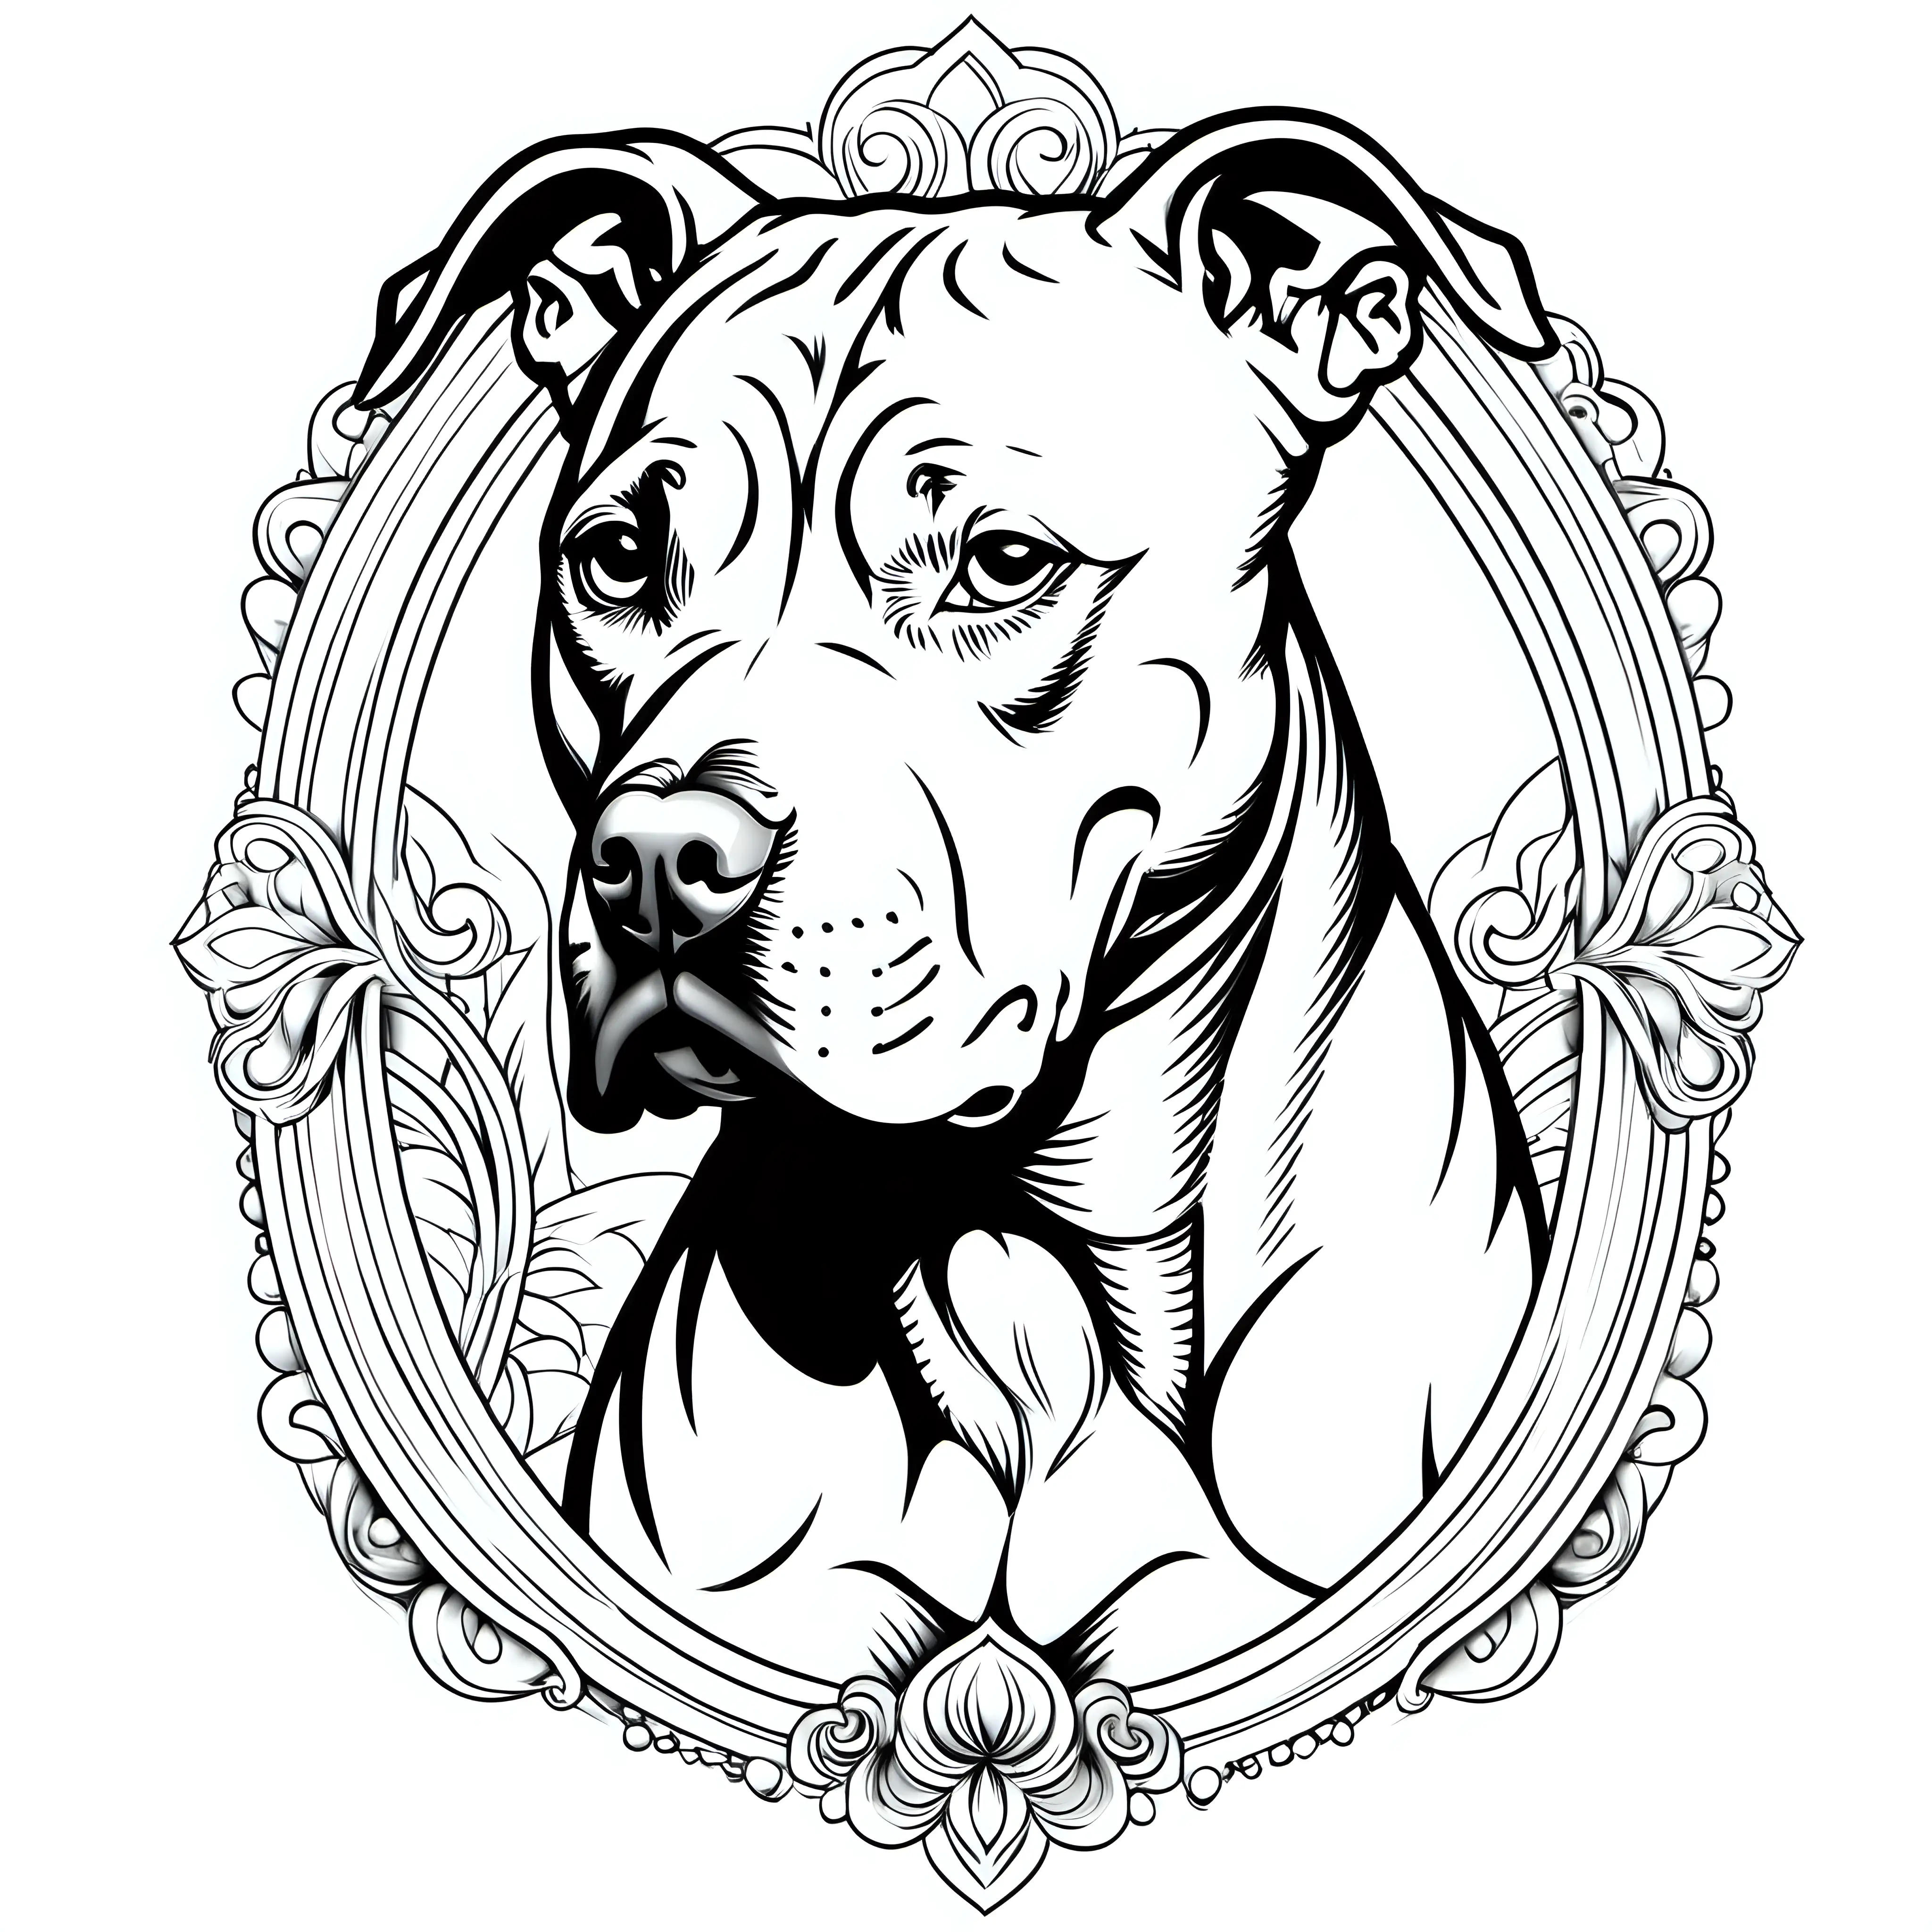 Majestic Pitbull Coloring Page for Adults